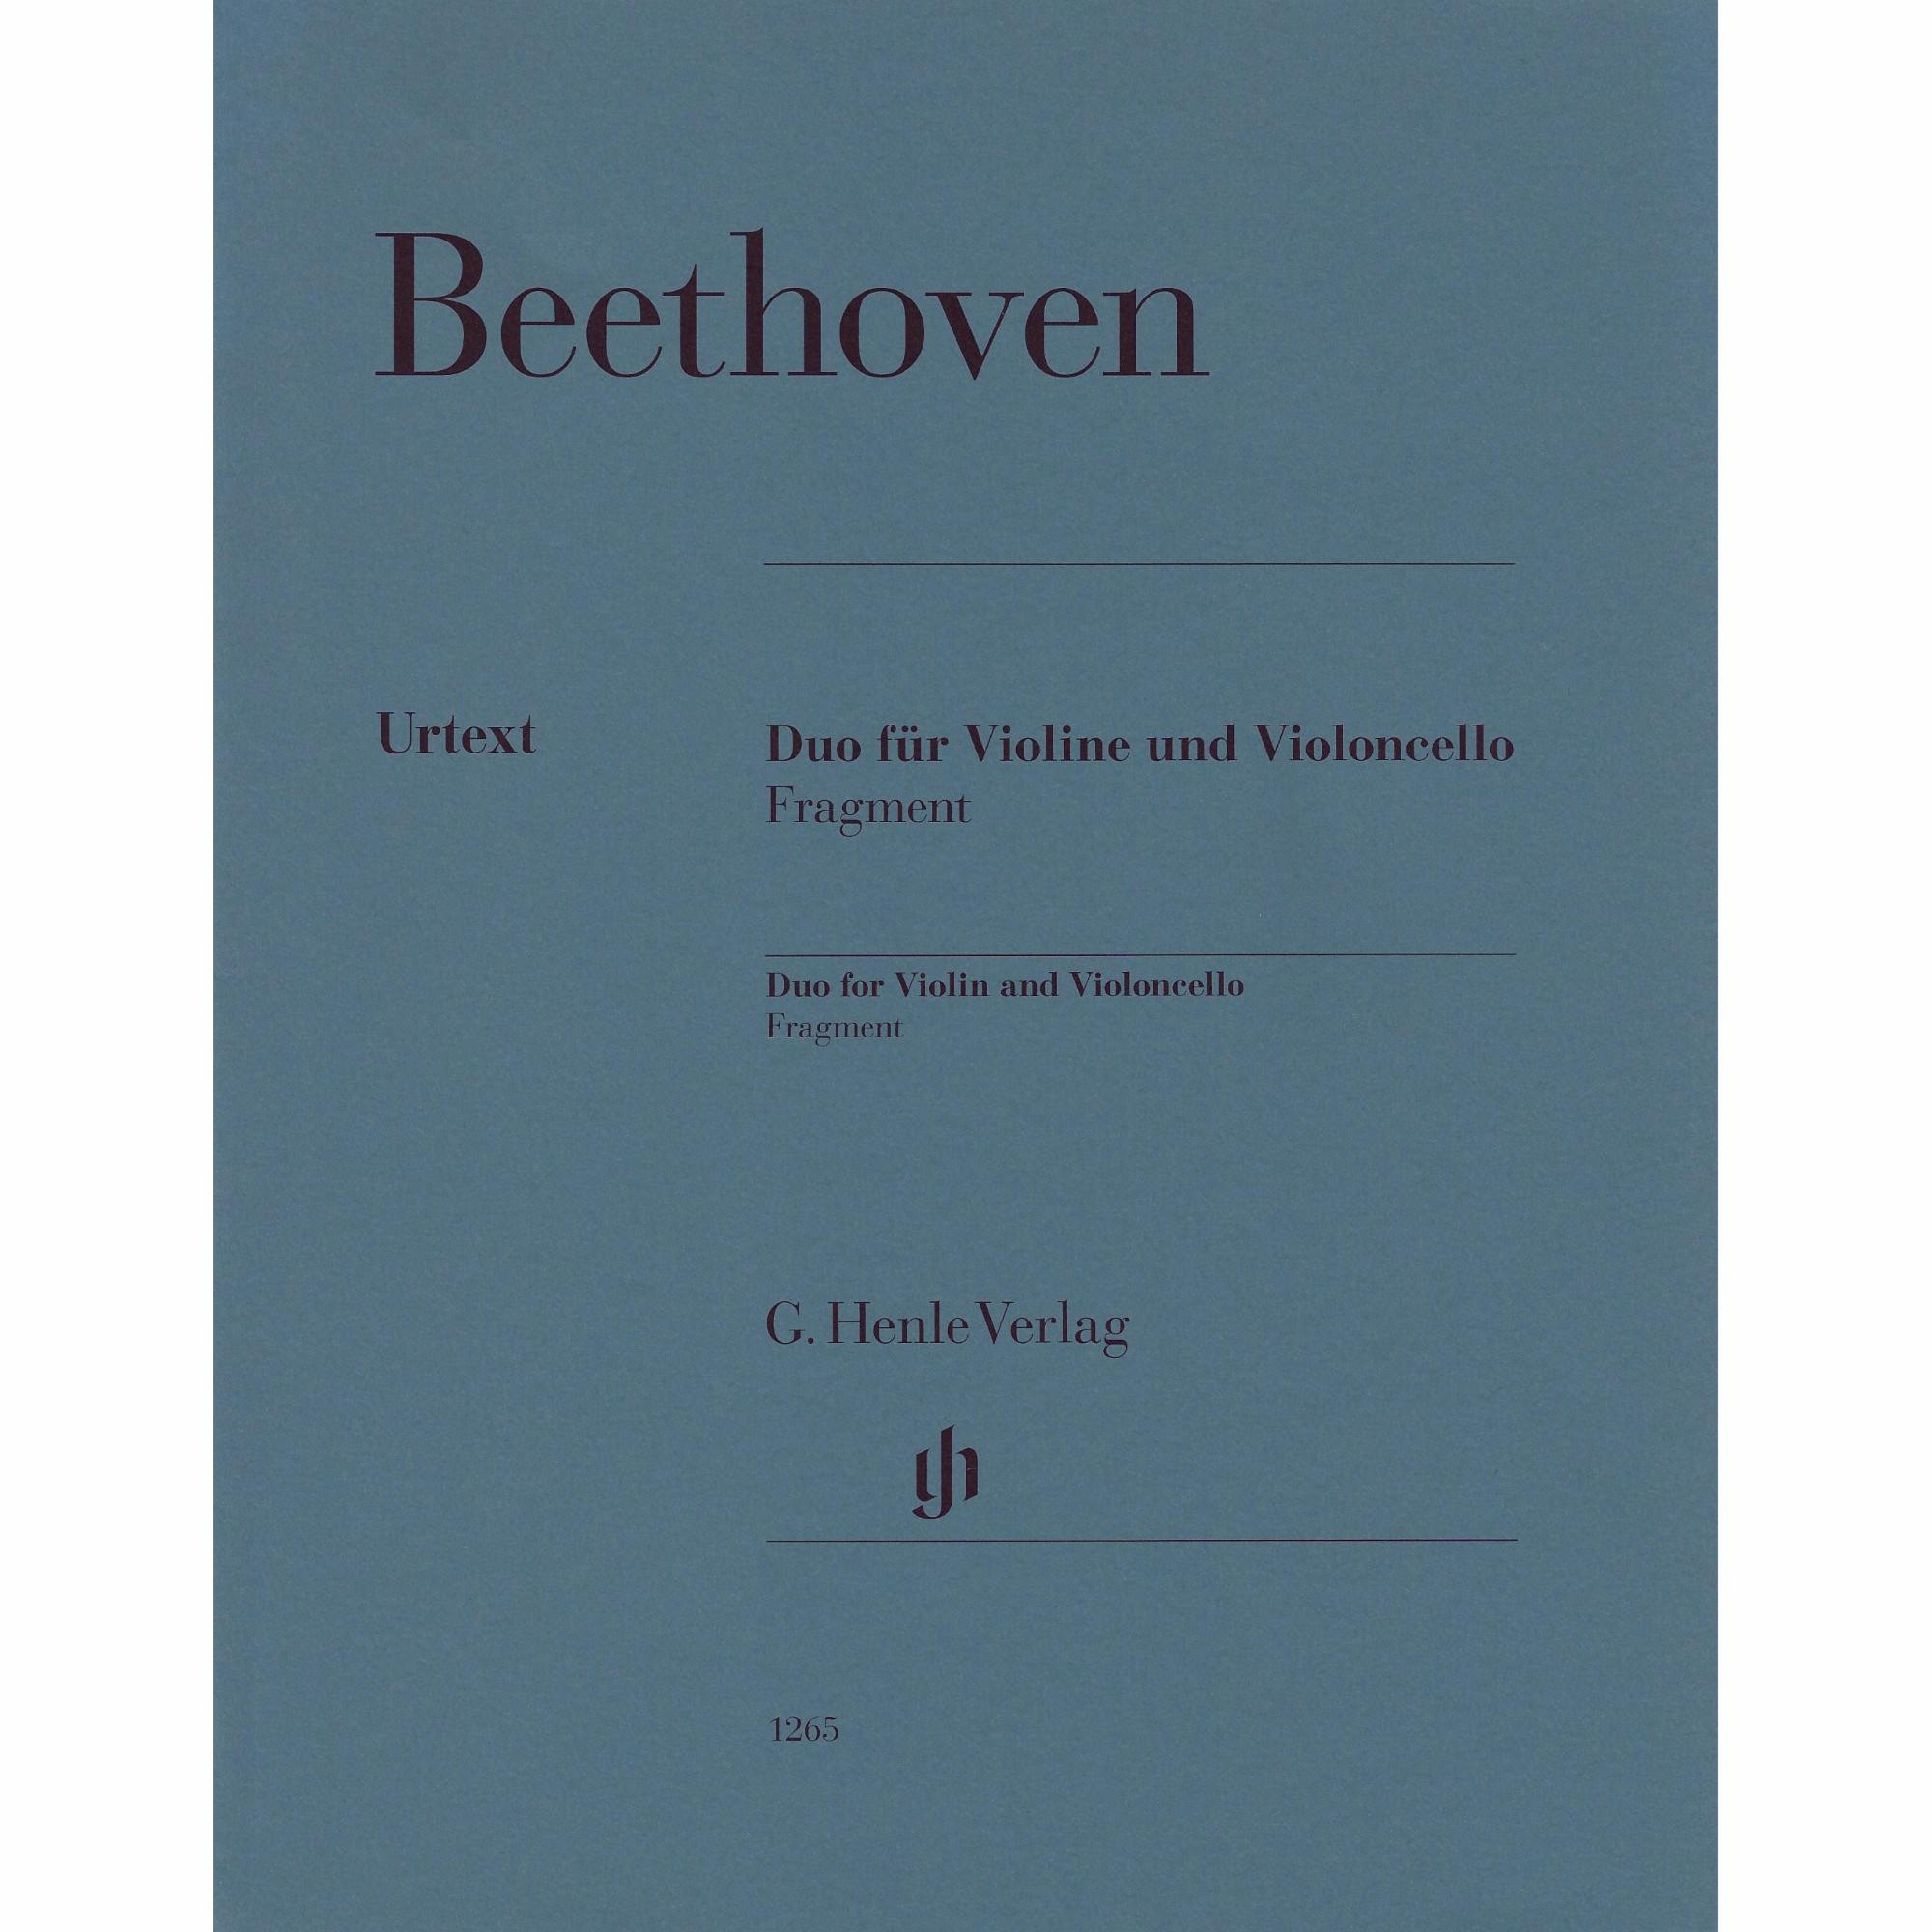 Beethoven -- Duet (Fragment) for Violin and Cello